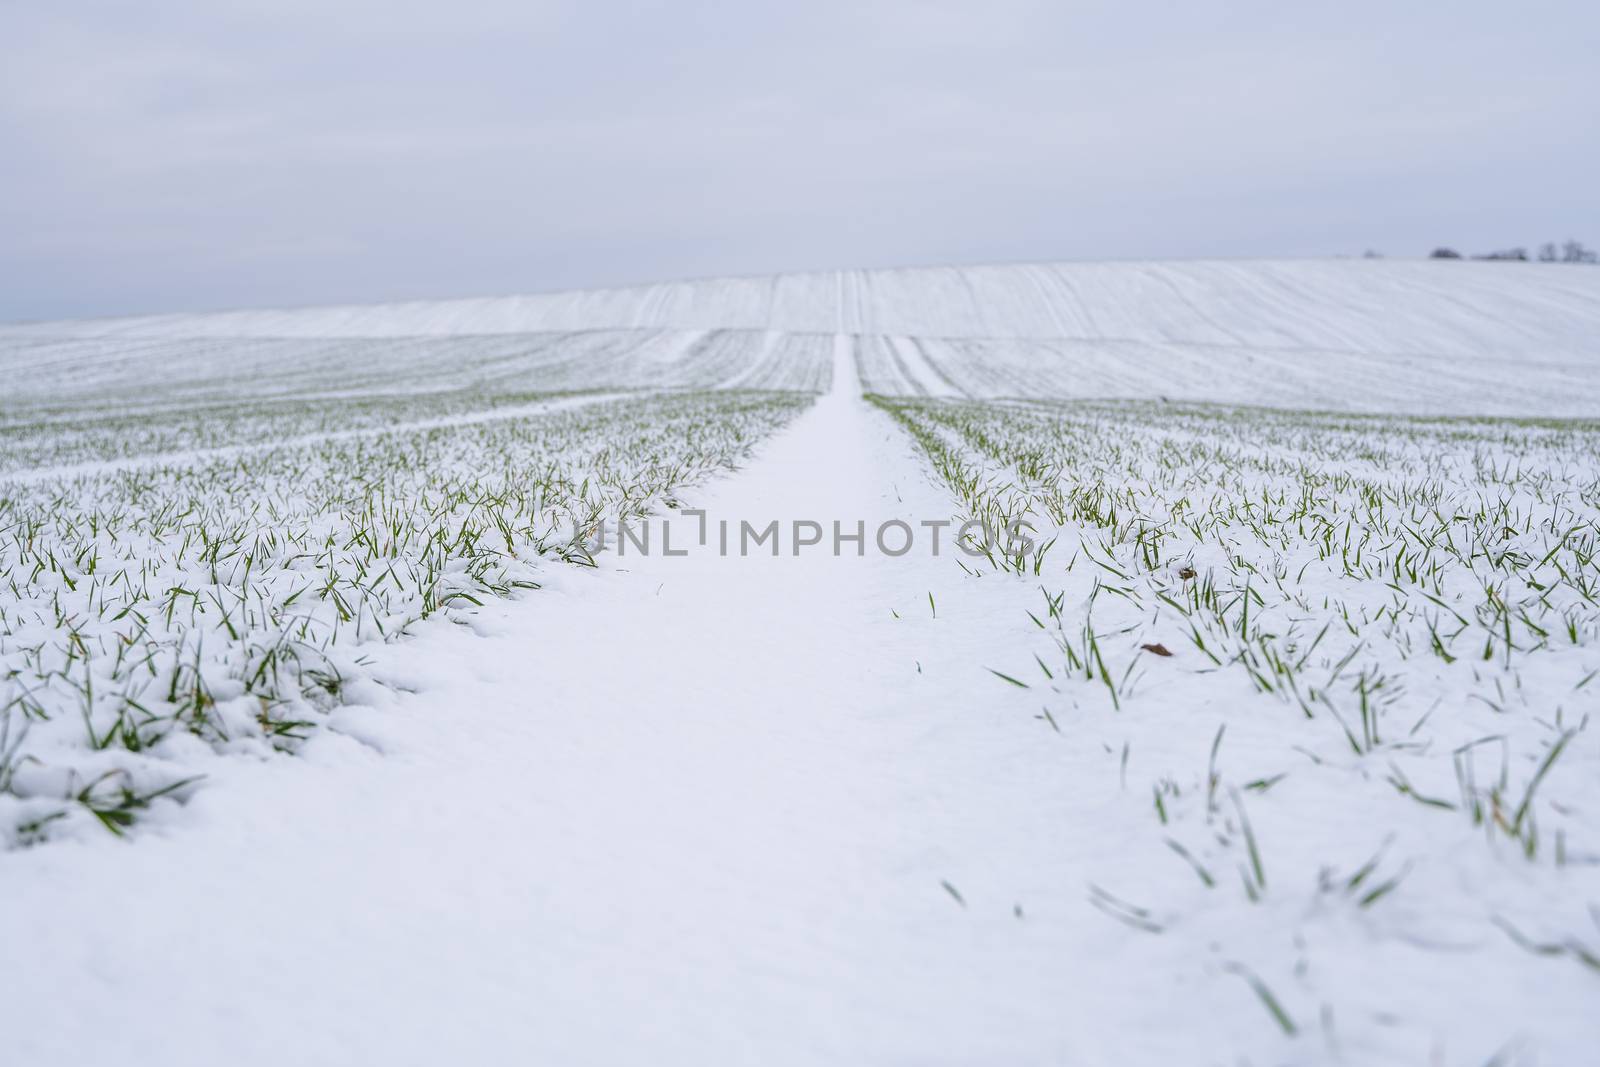 Wheat field covered with snow in winter season. Winter wheat. Green grass, lawn under the snow. Harvest in the cold. Growing grain crops for bread. Agriculture process with a crop cultures. by vovsht